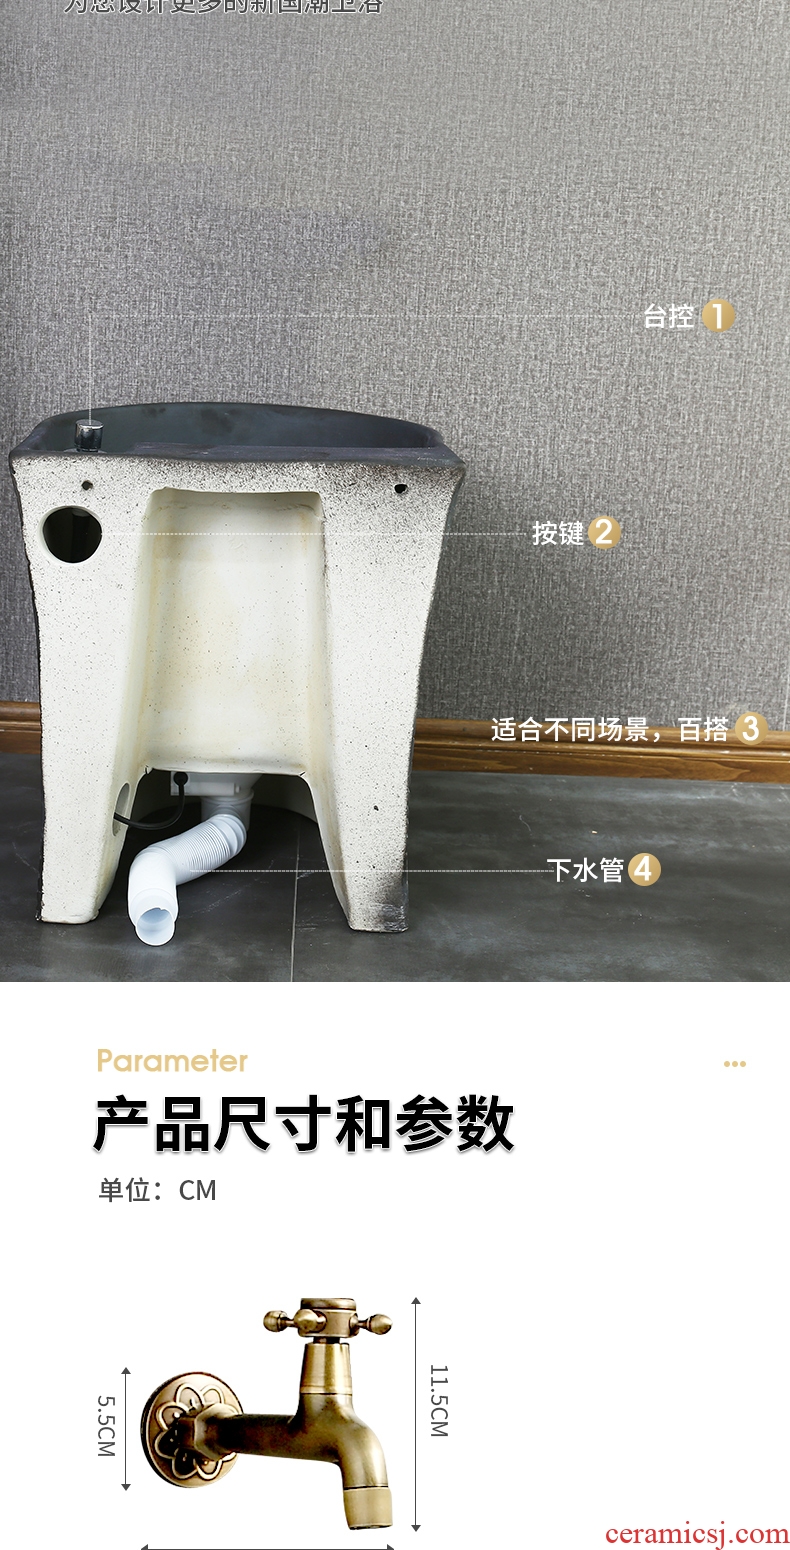 Ceramic mop pool balcony toilet household mop pool small is suing garden art restores ancient ways the mop pool outdoors